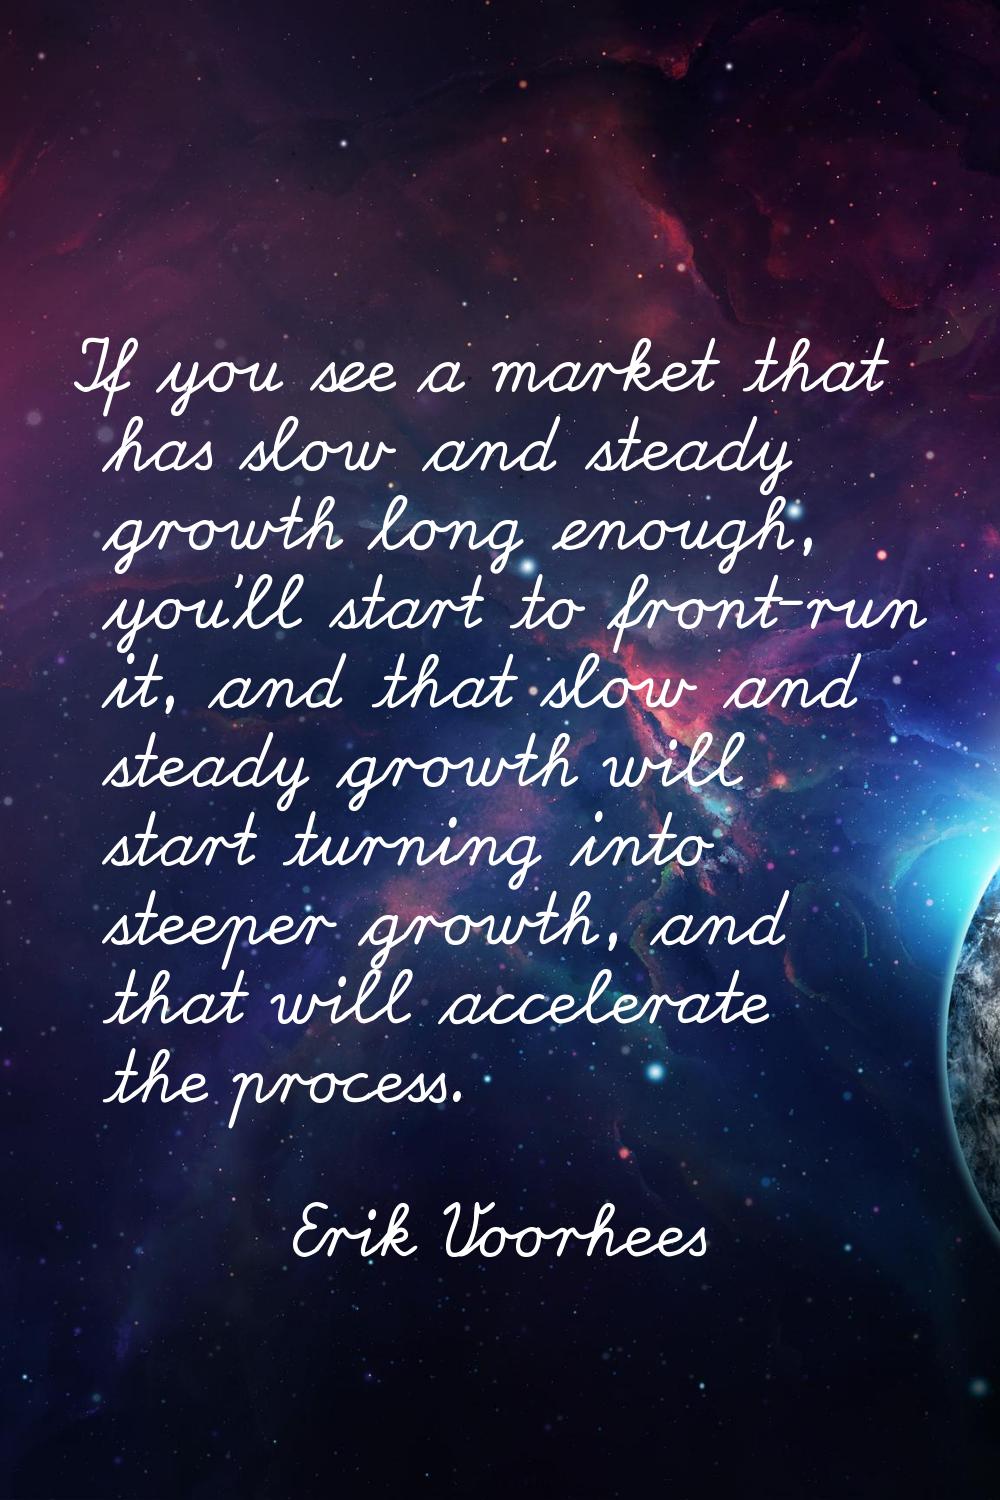 If you see a market that has slow and steady growth long enough, you'll start to front-run it, and 